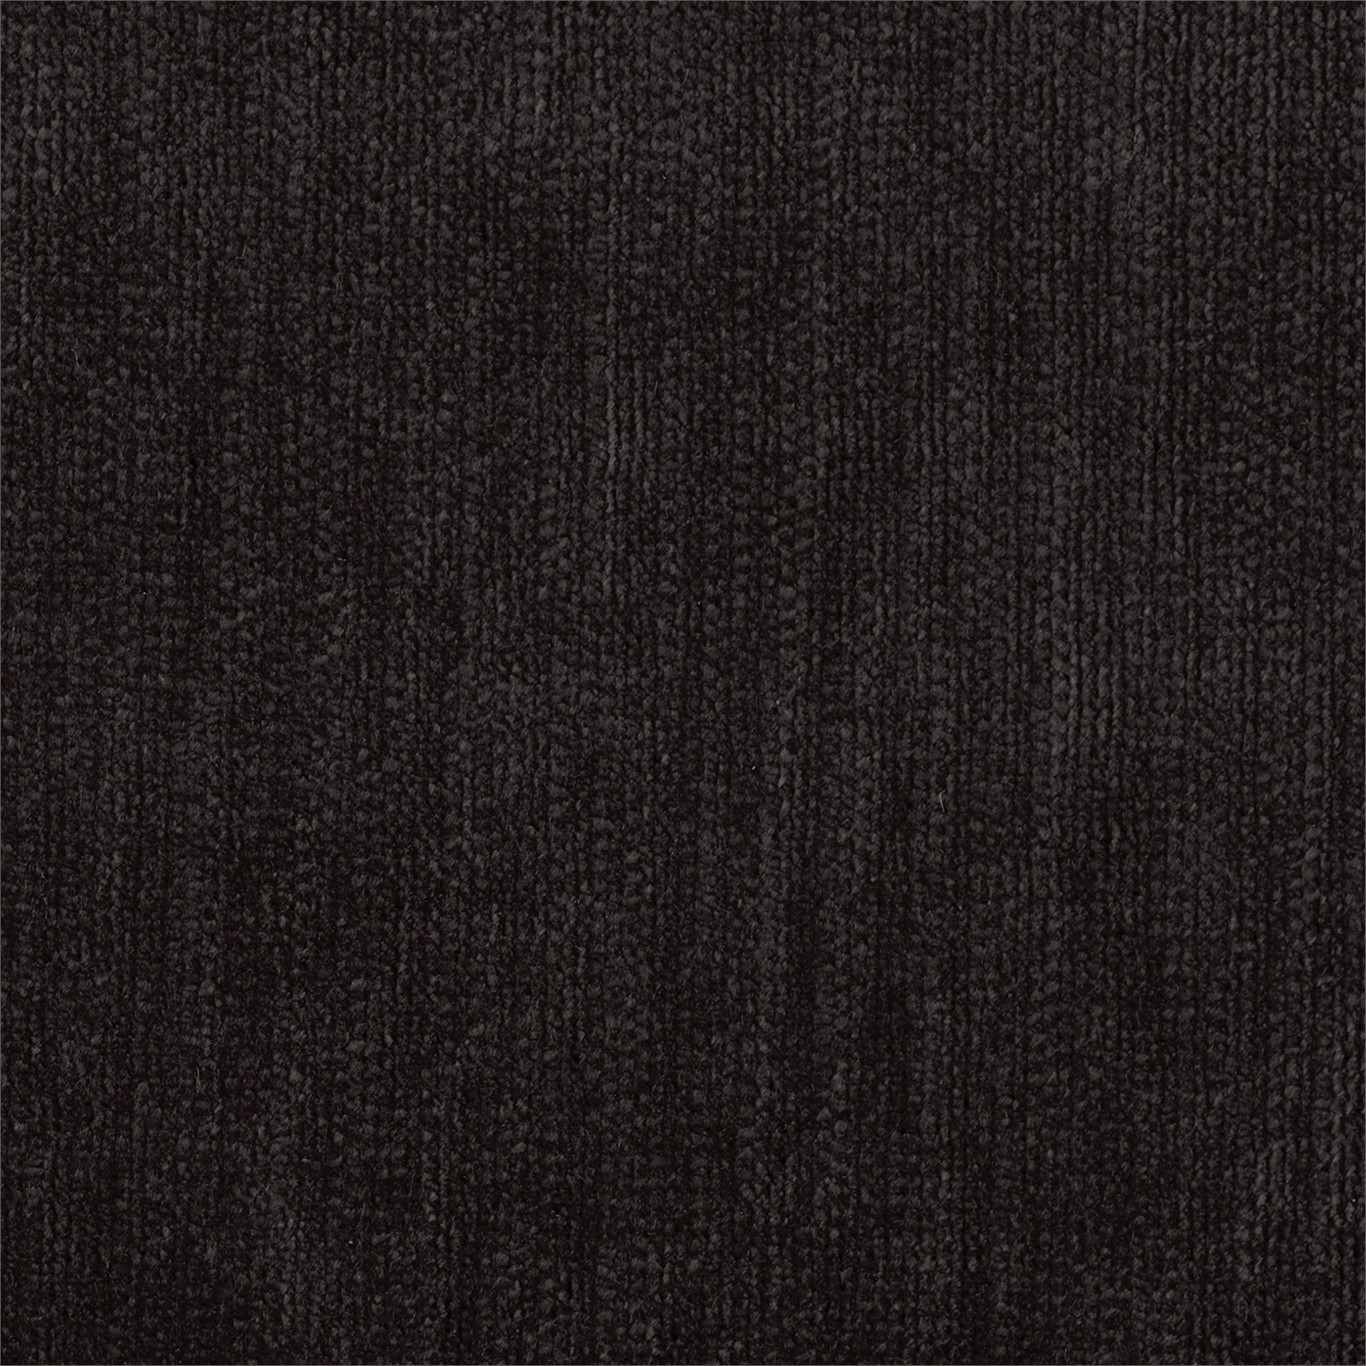 Momentum Velvets Charcoal Fabric by HAR